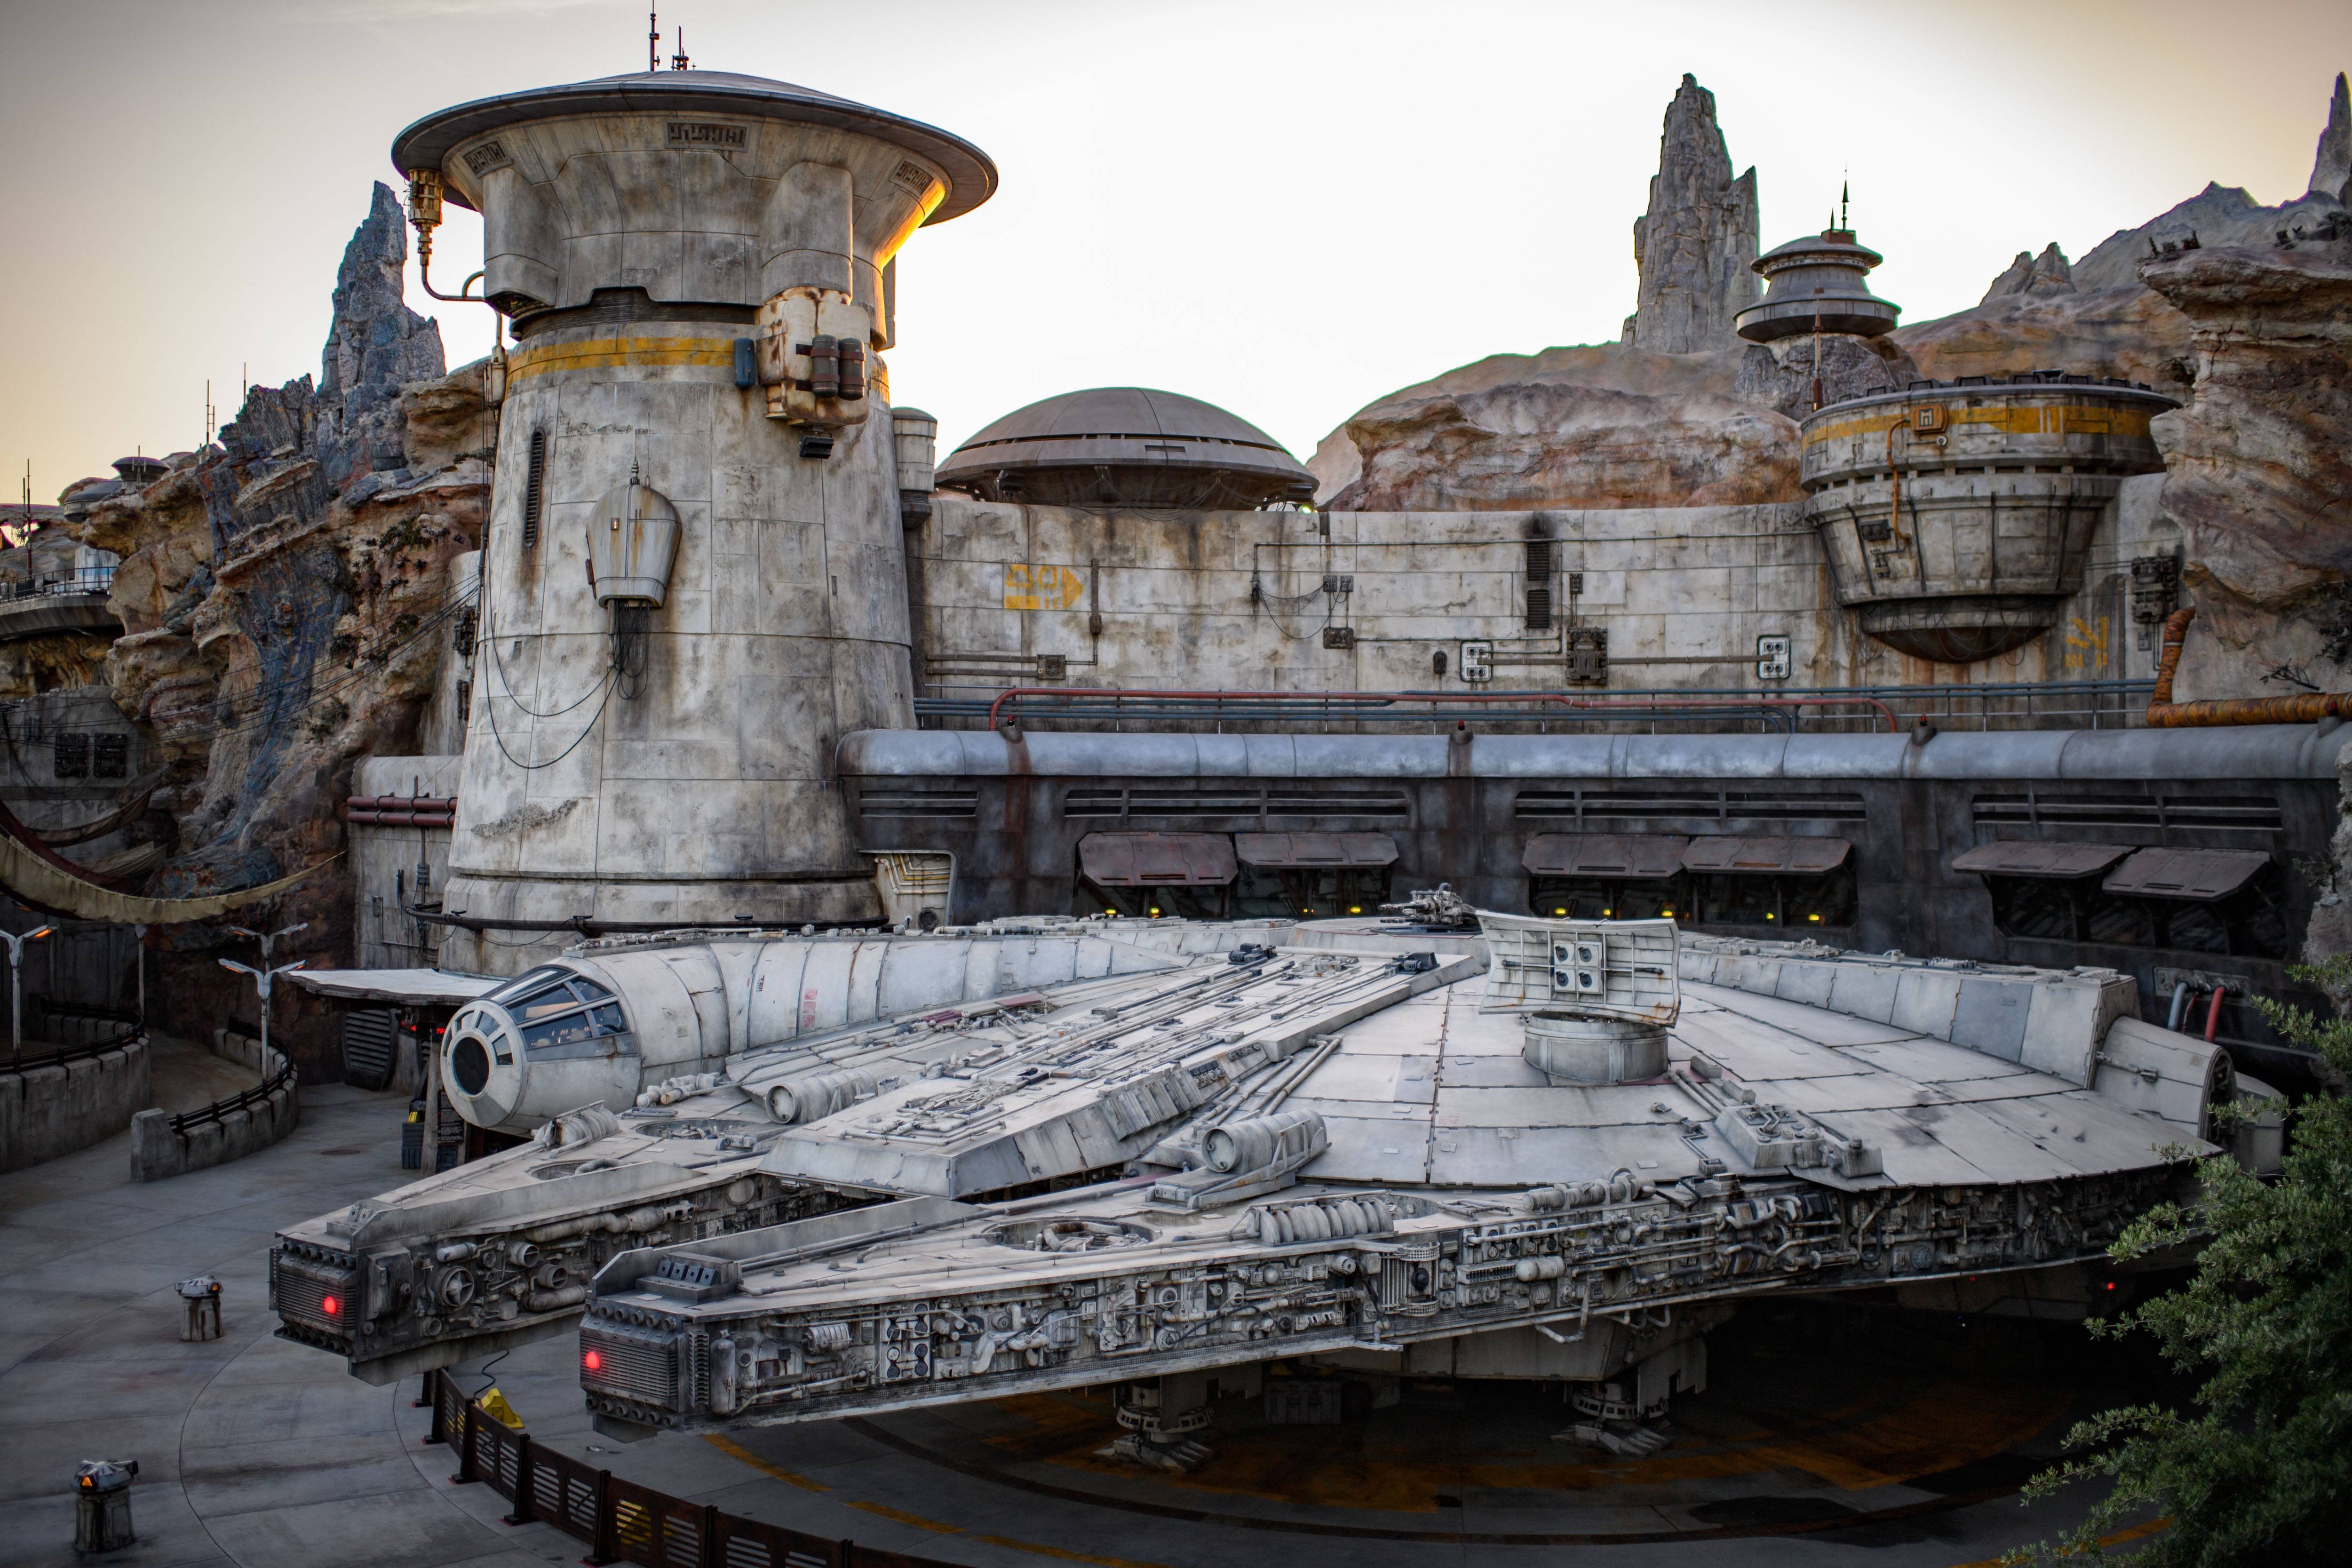 Planet of Batuu to feature in upcoming book ahead of Star Wars Galaxy's Edge opening